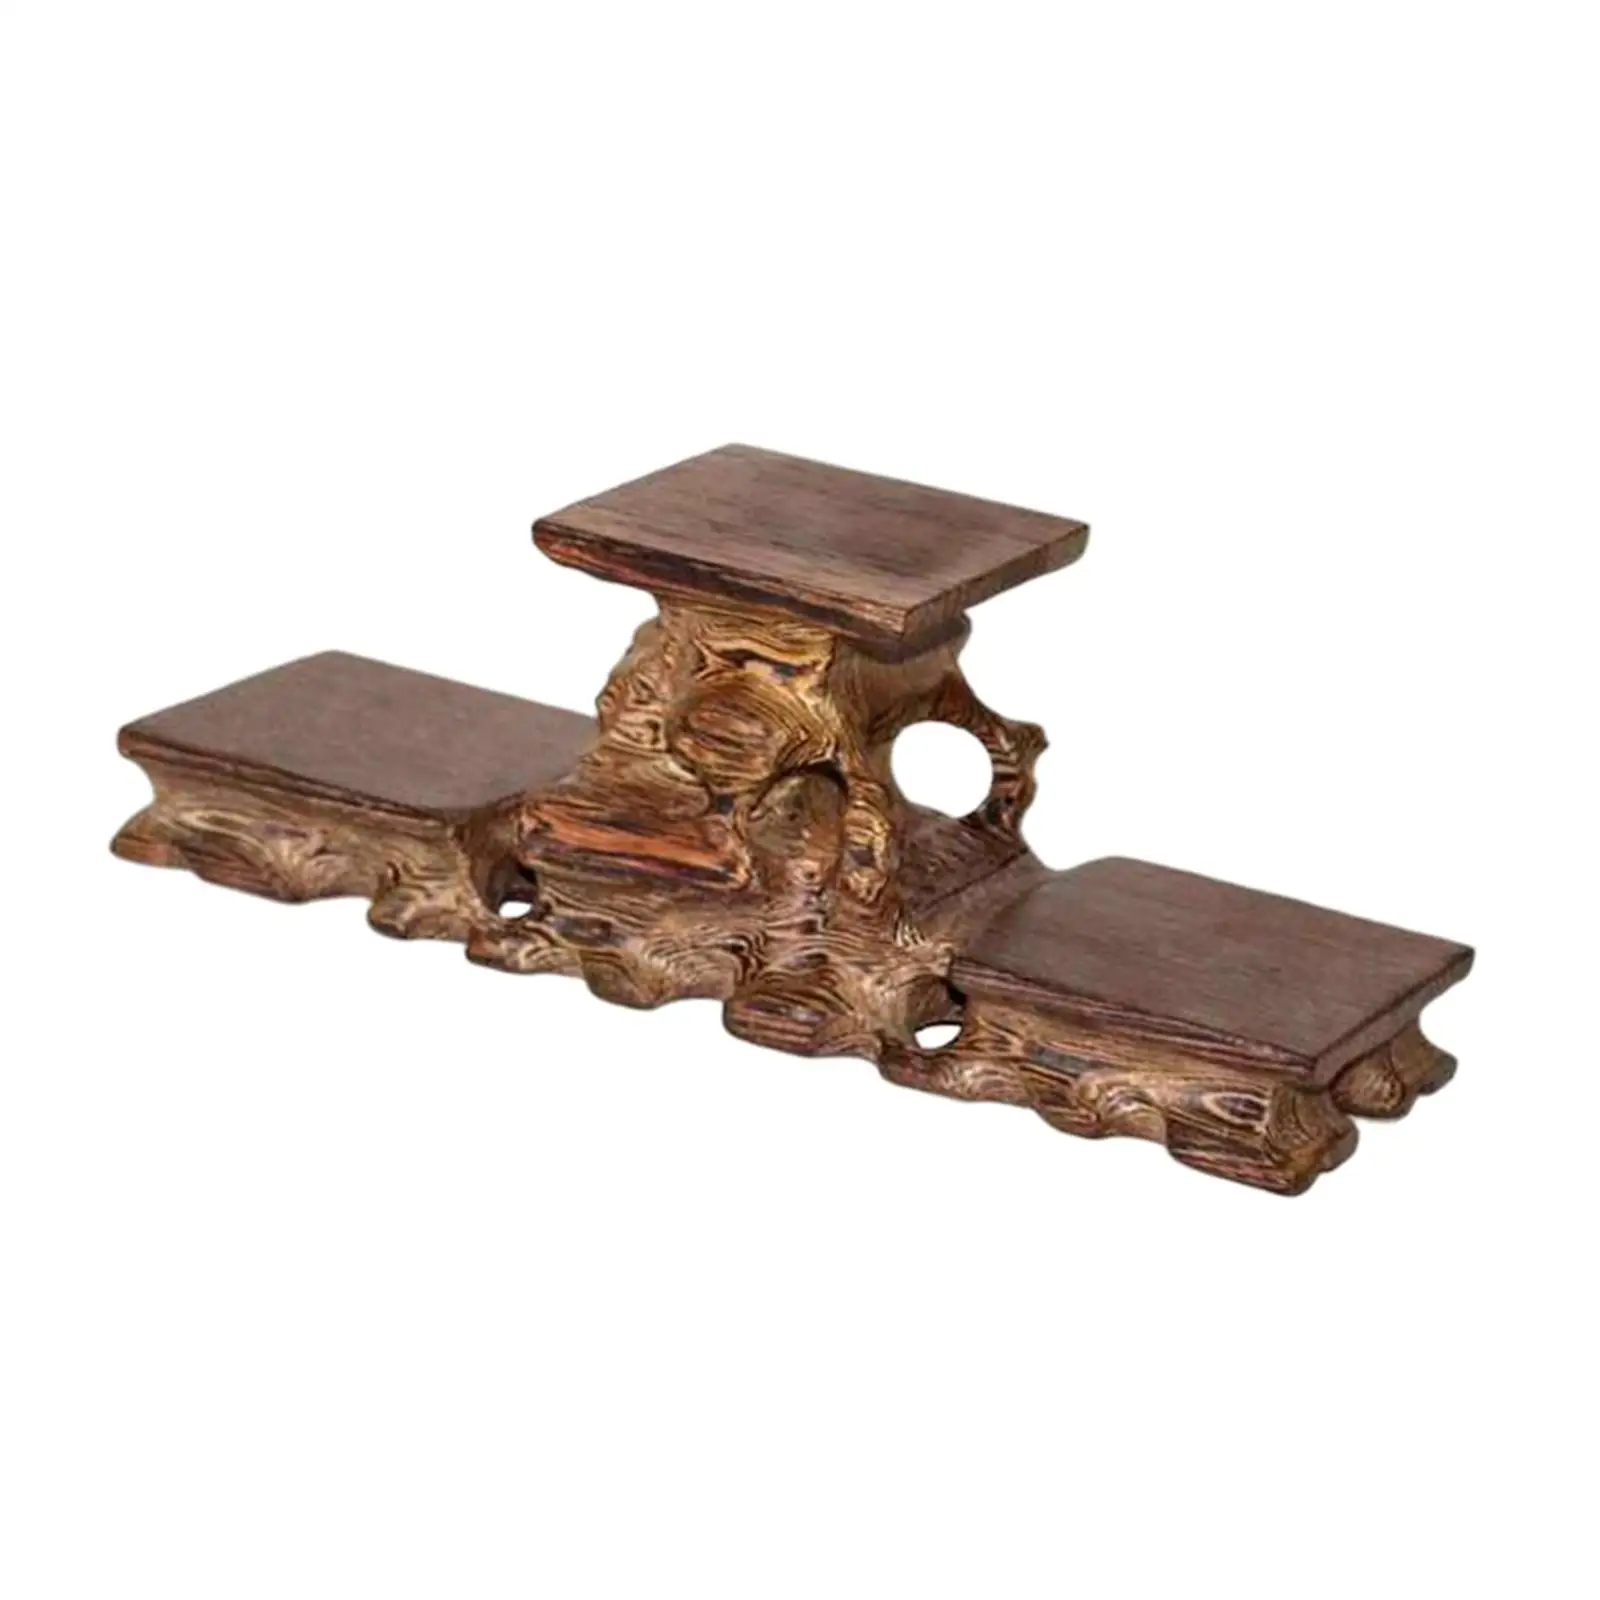 Wooden Stone Display Base Ornaments Display Stand for Photography Props Home